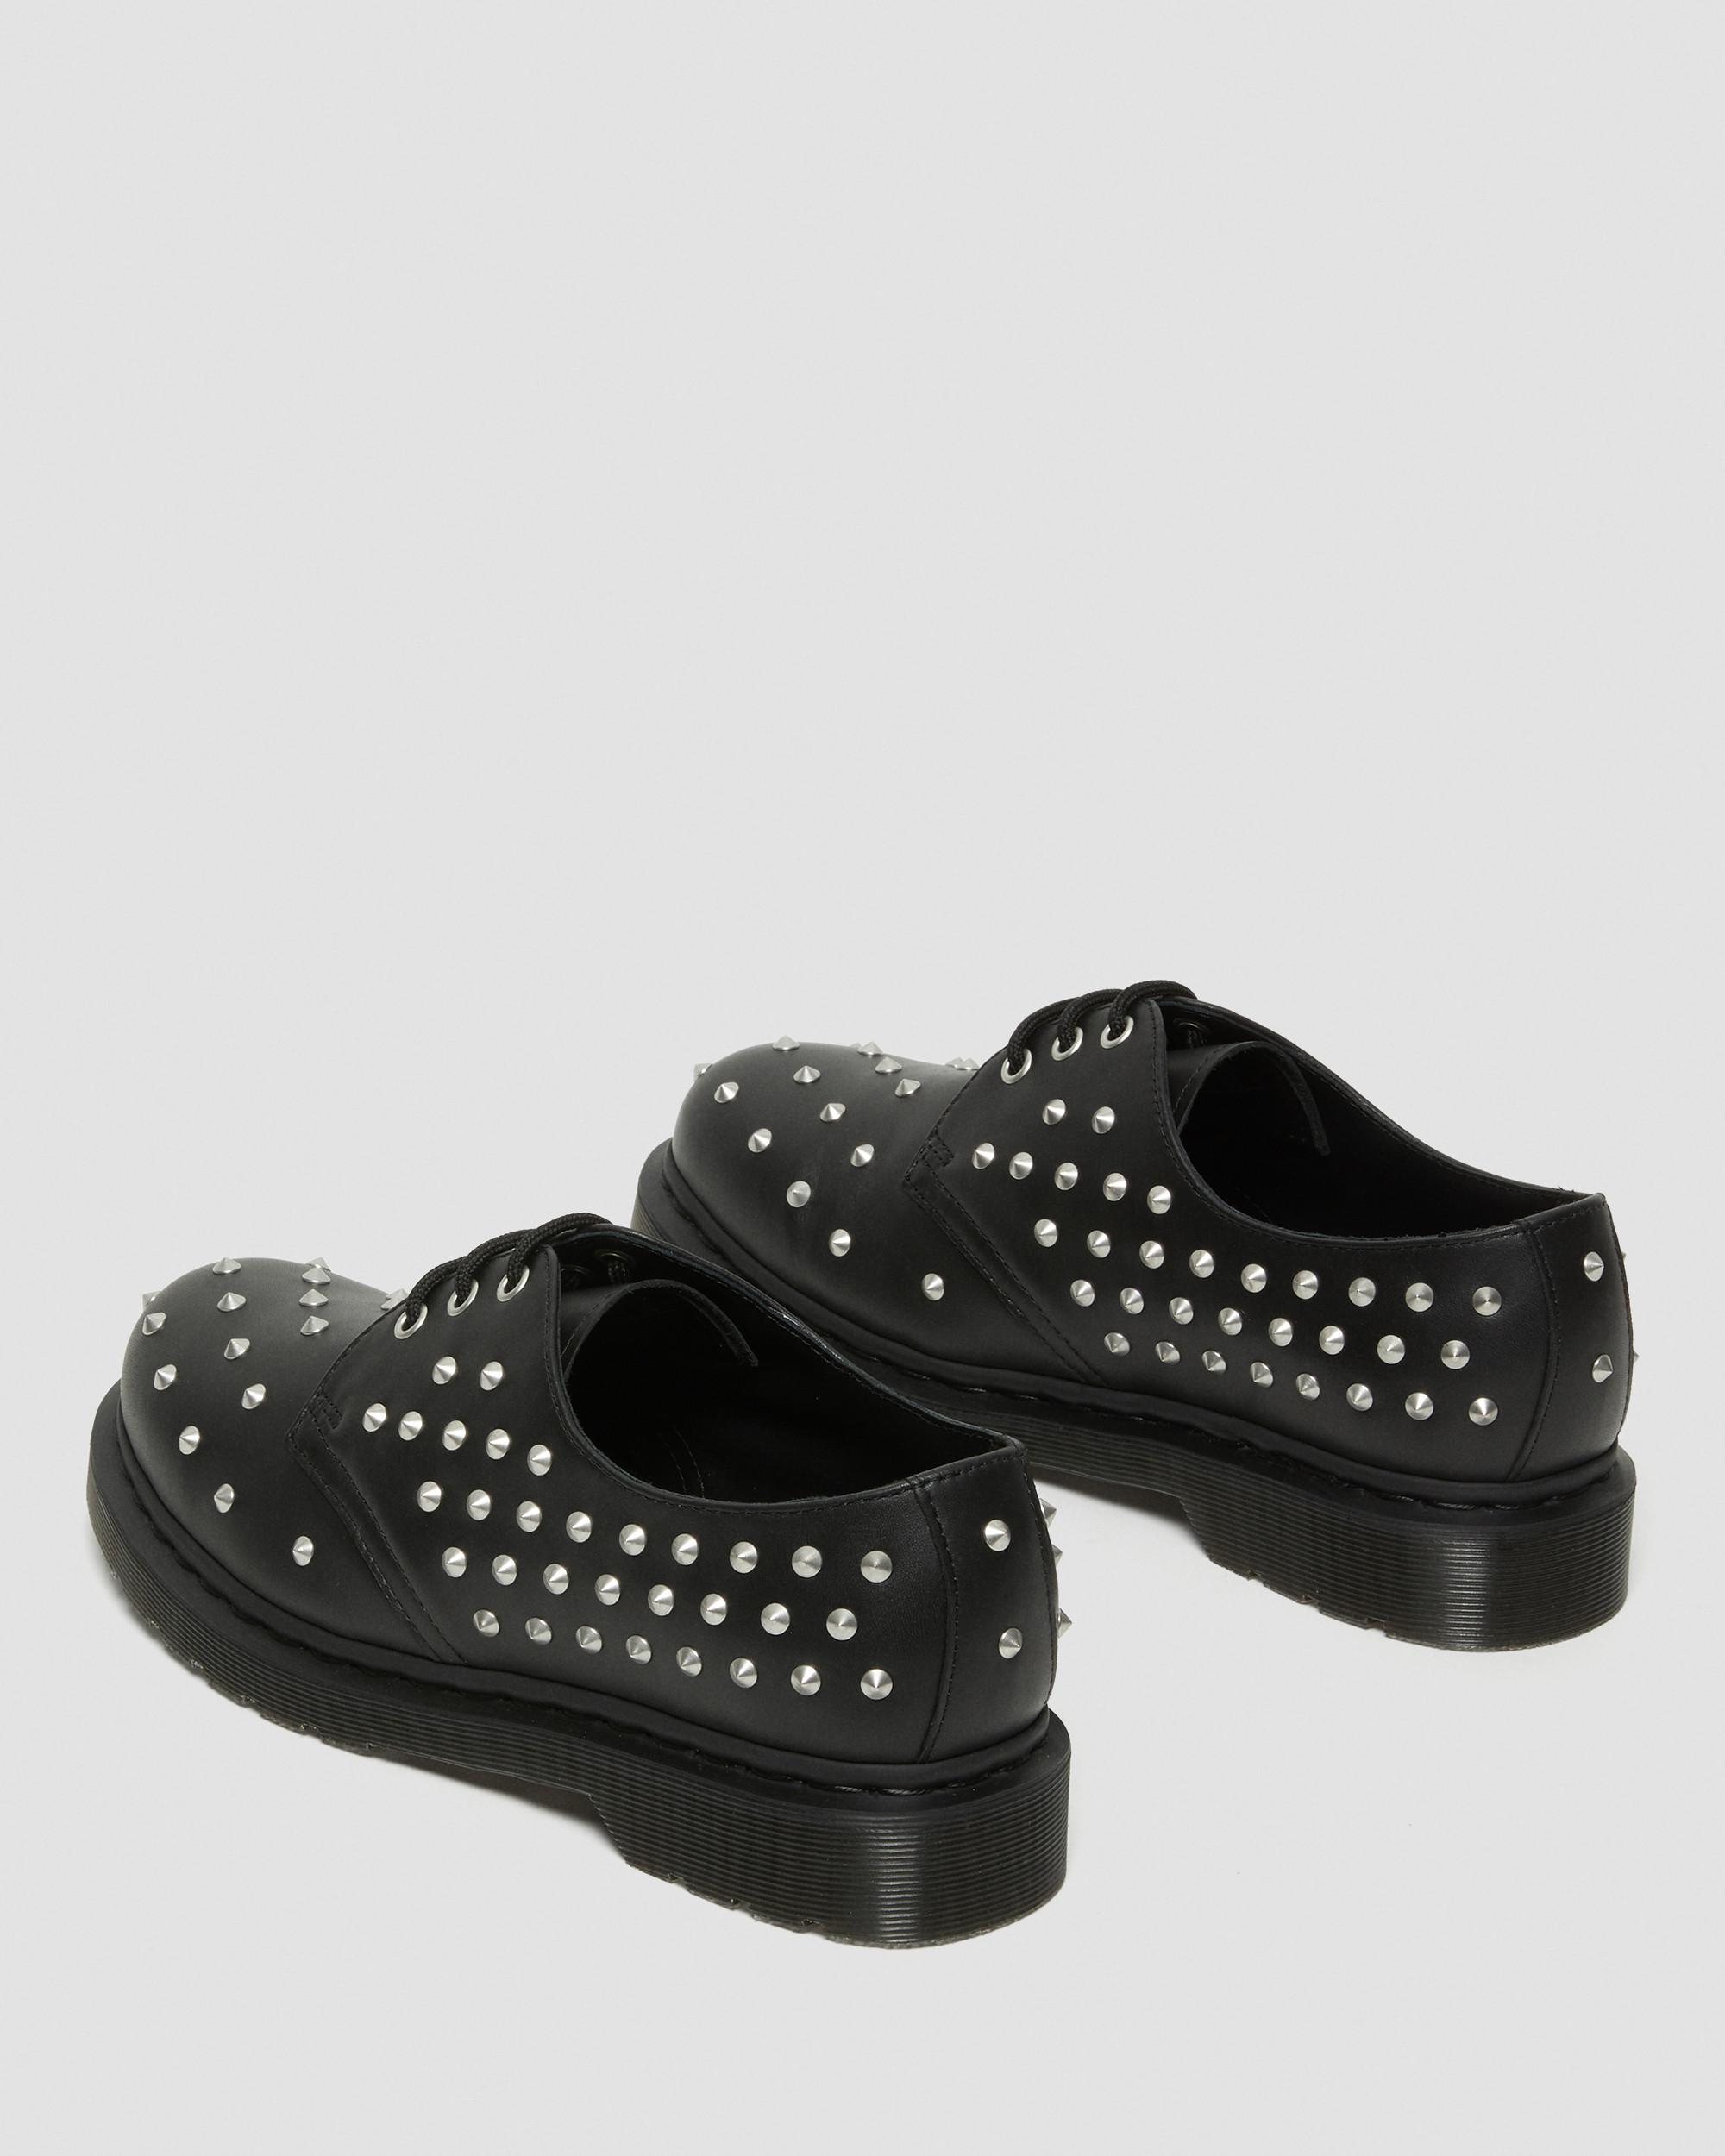 DR MARTENS 1461 Stud Wanama Leather Oxford Shoes